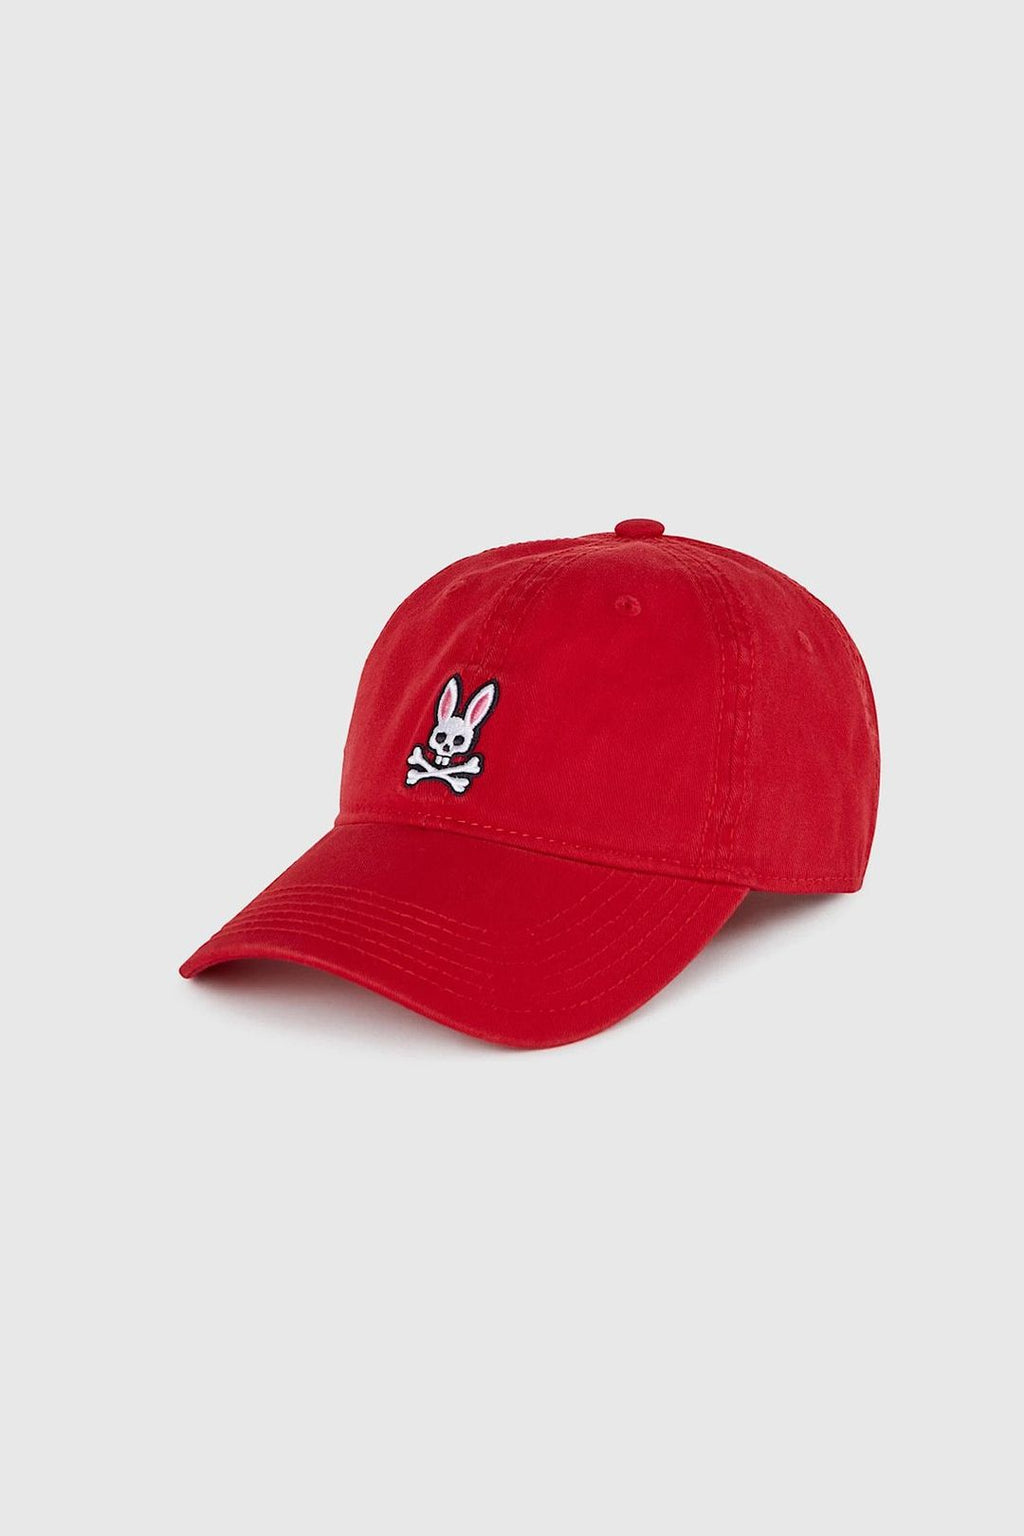 MENS SUNBLEACHED RED CAP | PSYCHO BUNNY